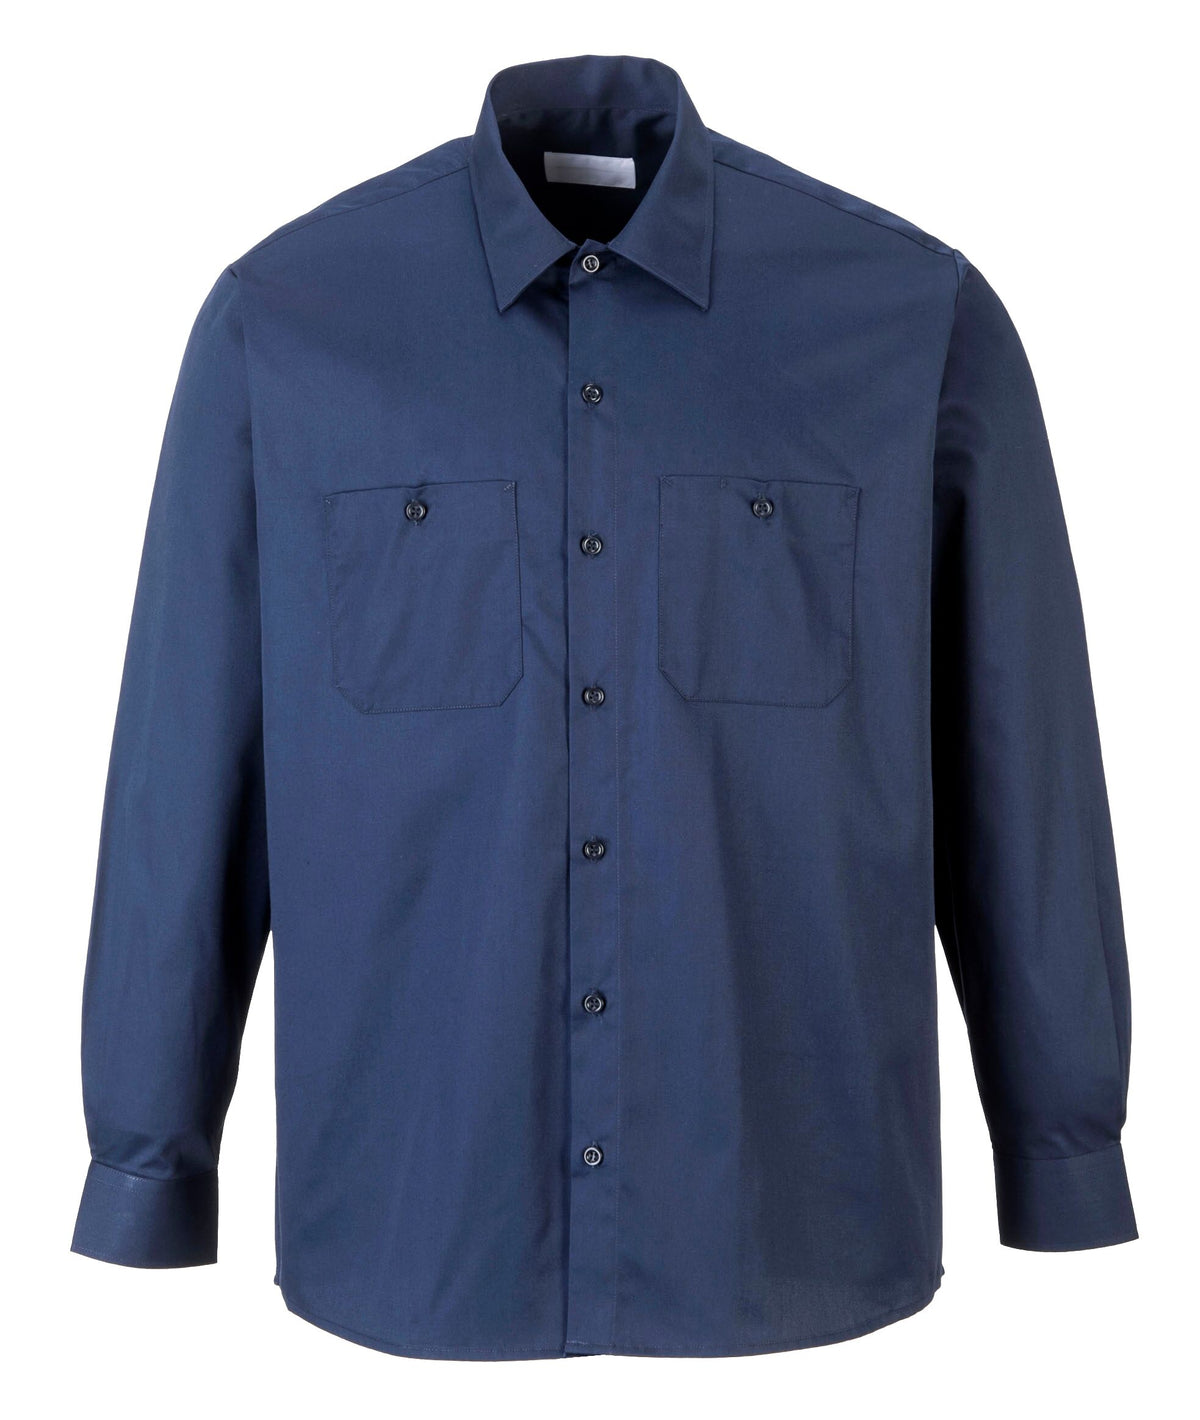 Industrial Work Shirt, Long Sleeve - Safety Shirts for Men